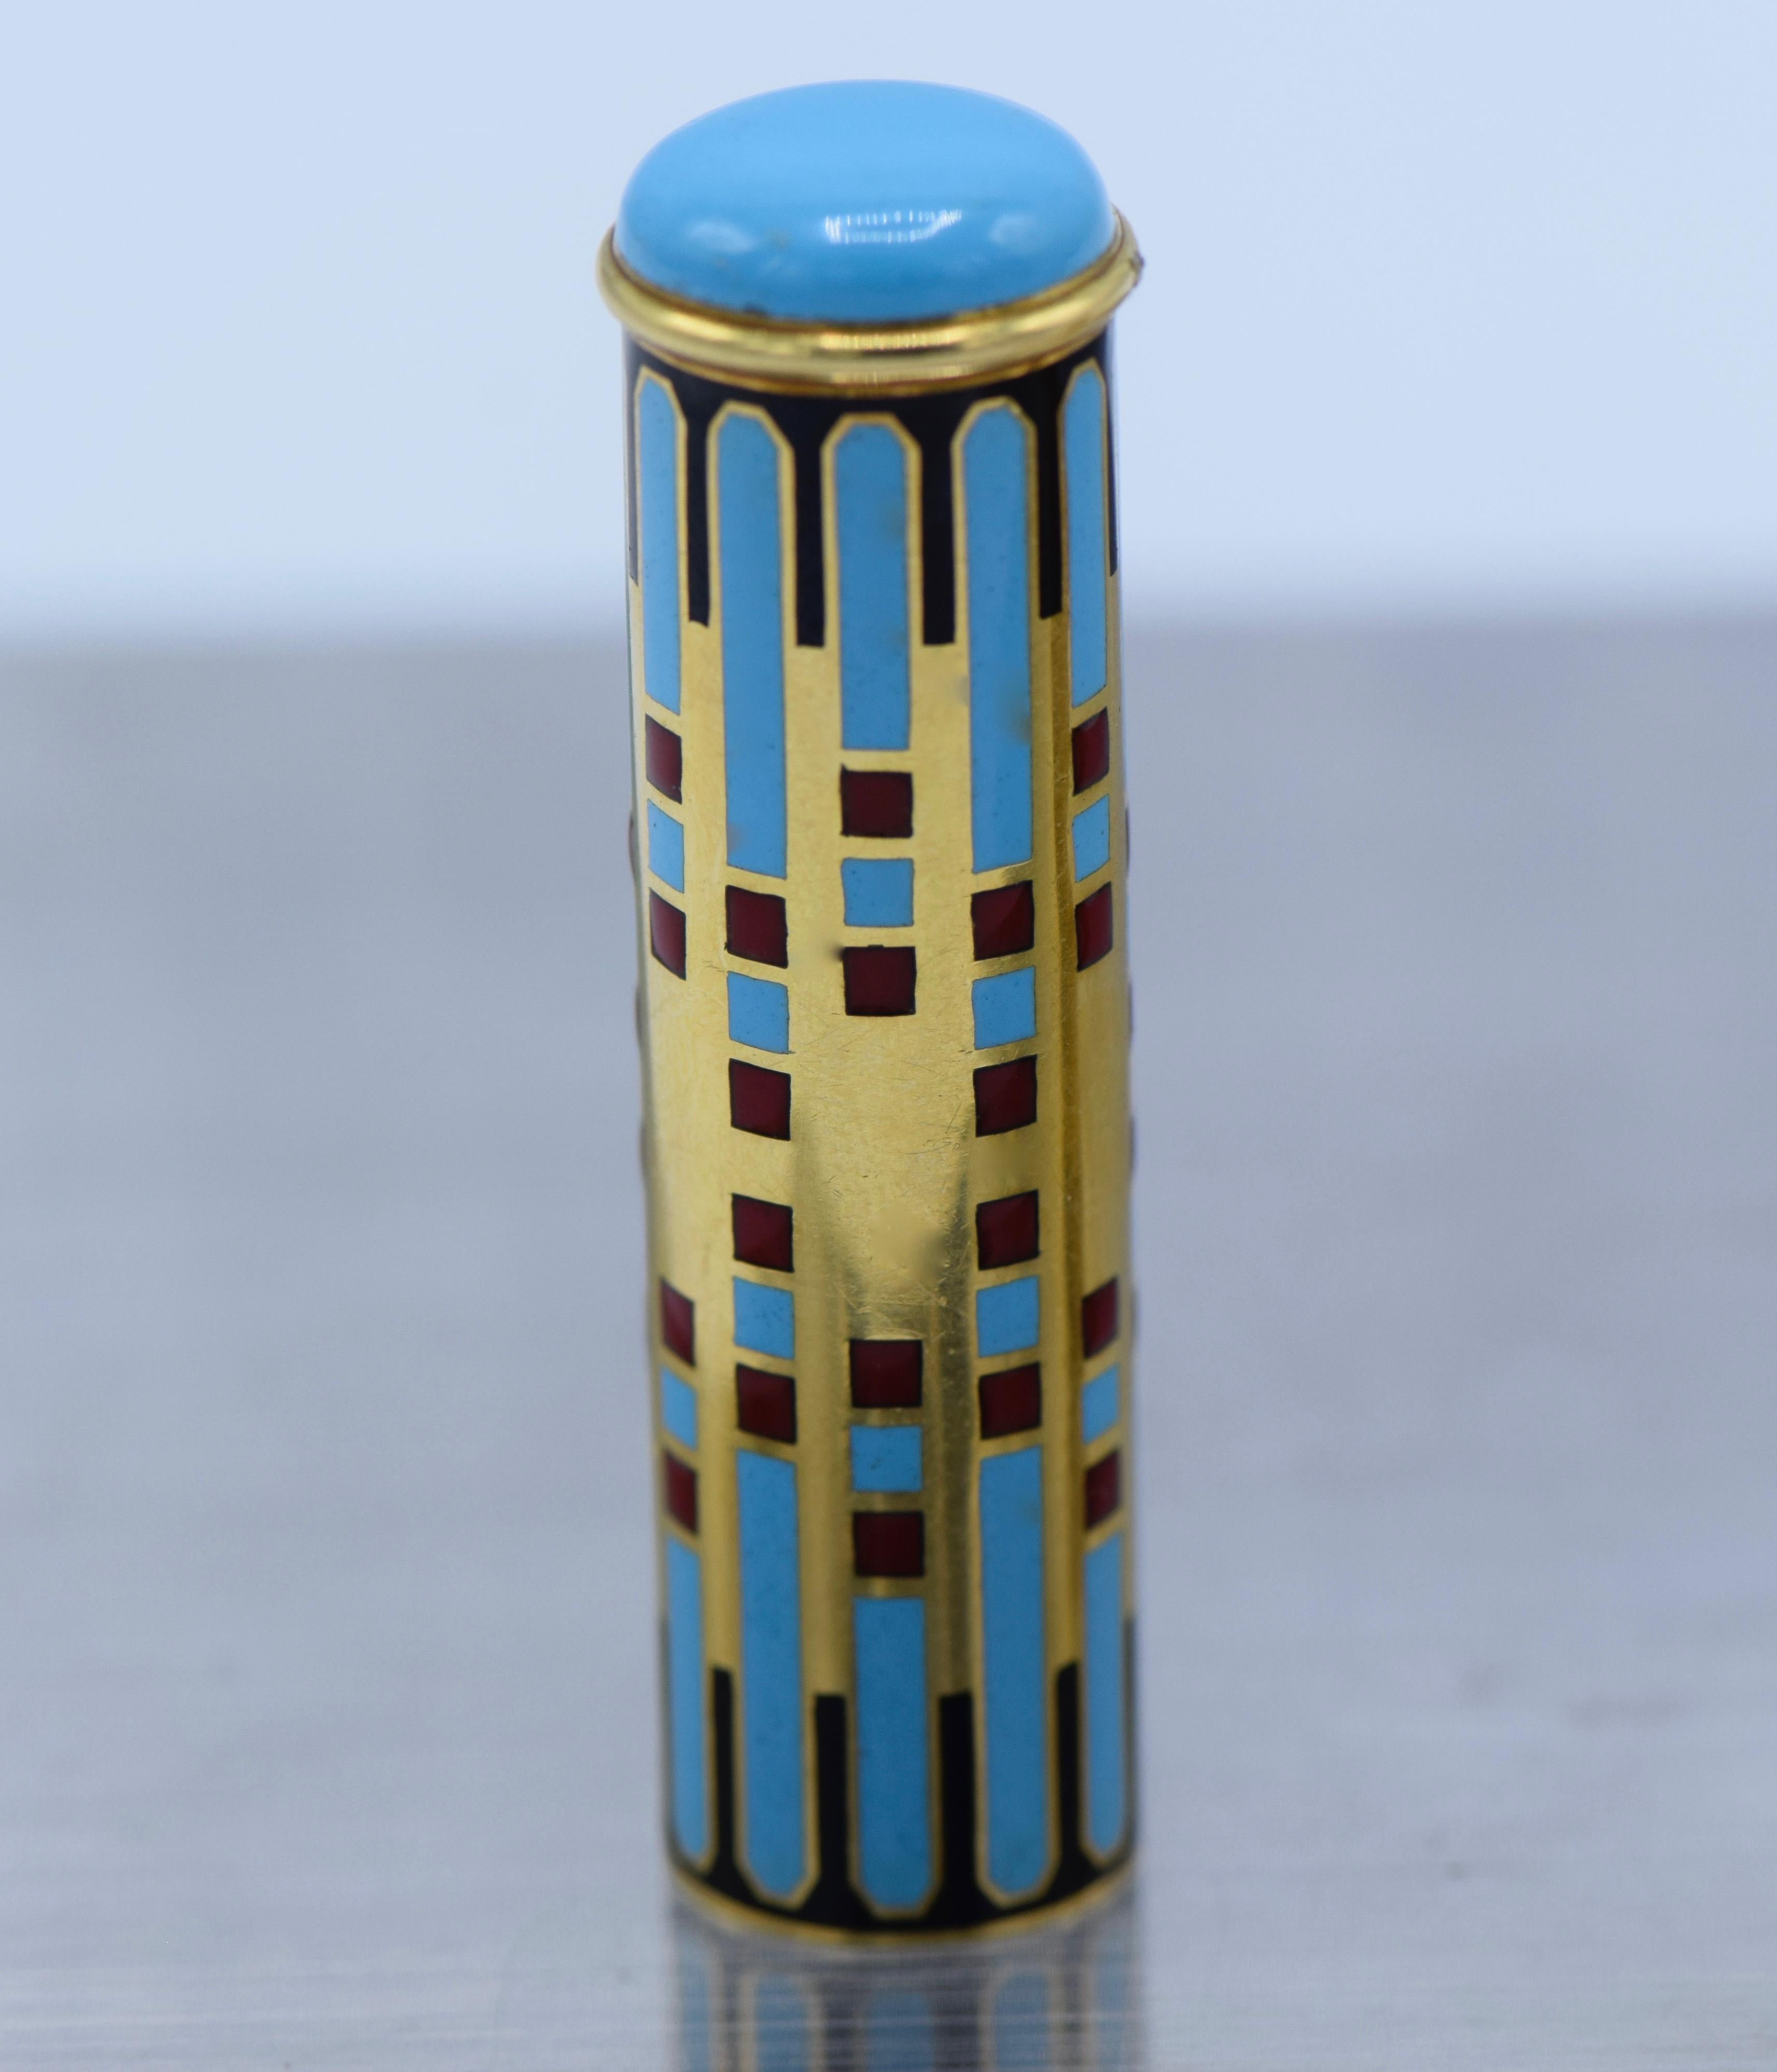 Van Cleef & Arpels, France, Art Deco 1920's, 18k Gold and Enamel Lipstick Holder.

In typical Art Deco fashion, this unique lipstick holder has a soft colored enamel with a sky blue, red, and black geometric pattern. This lipstick holder was created